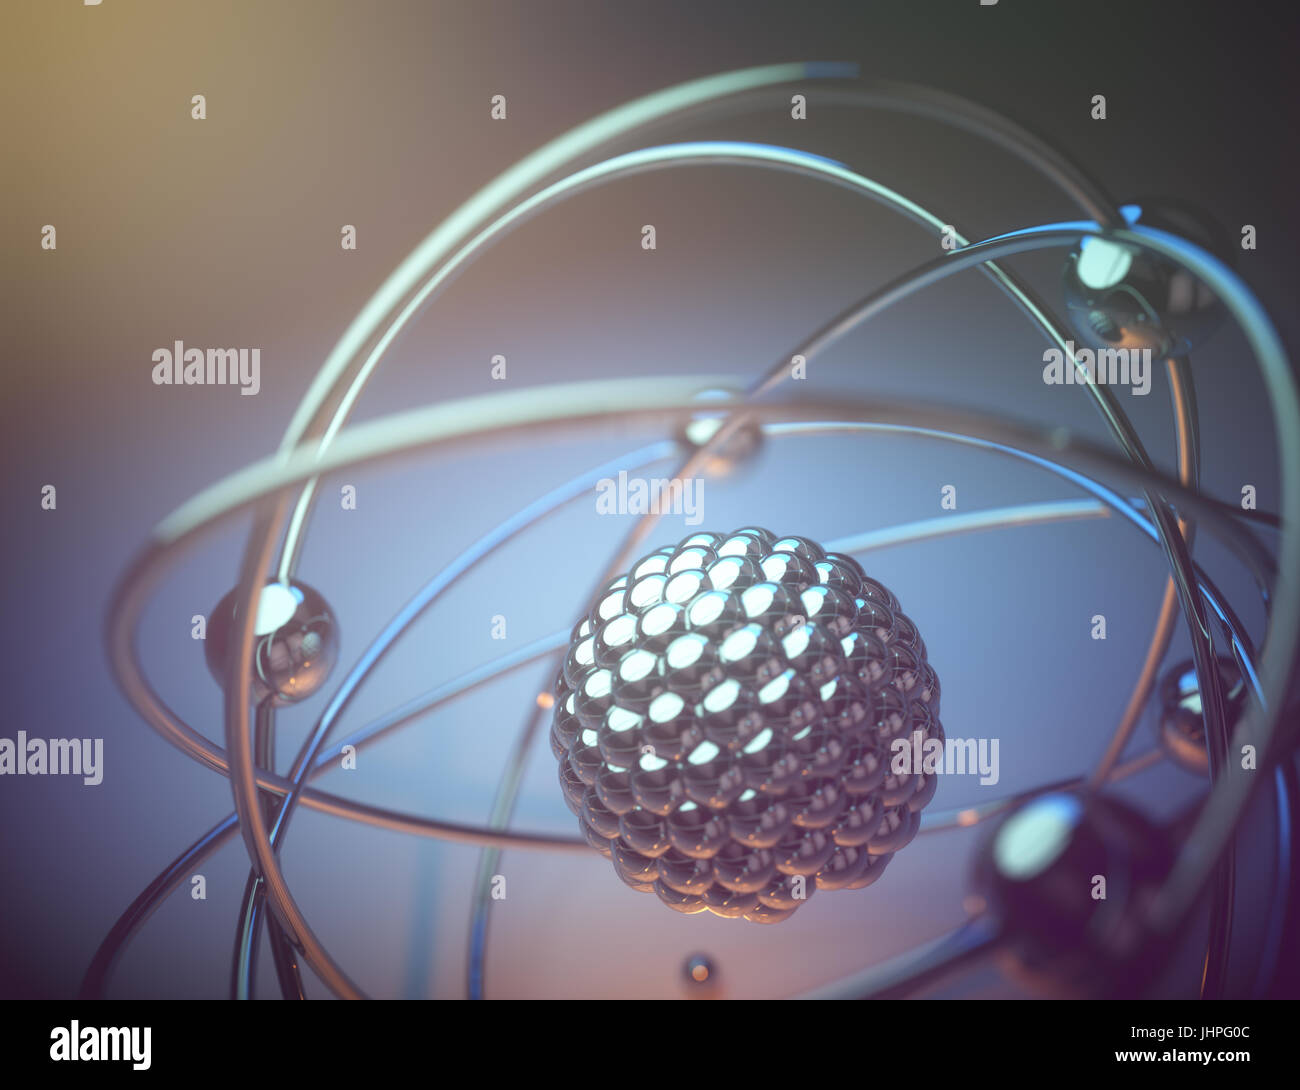 3D illustration. Concept image of a nuclear atomic model with nuclear fusion. Stock Photo